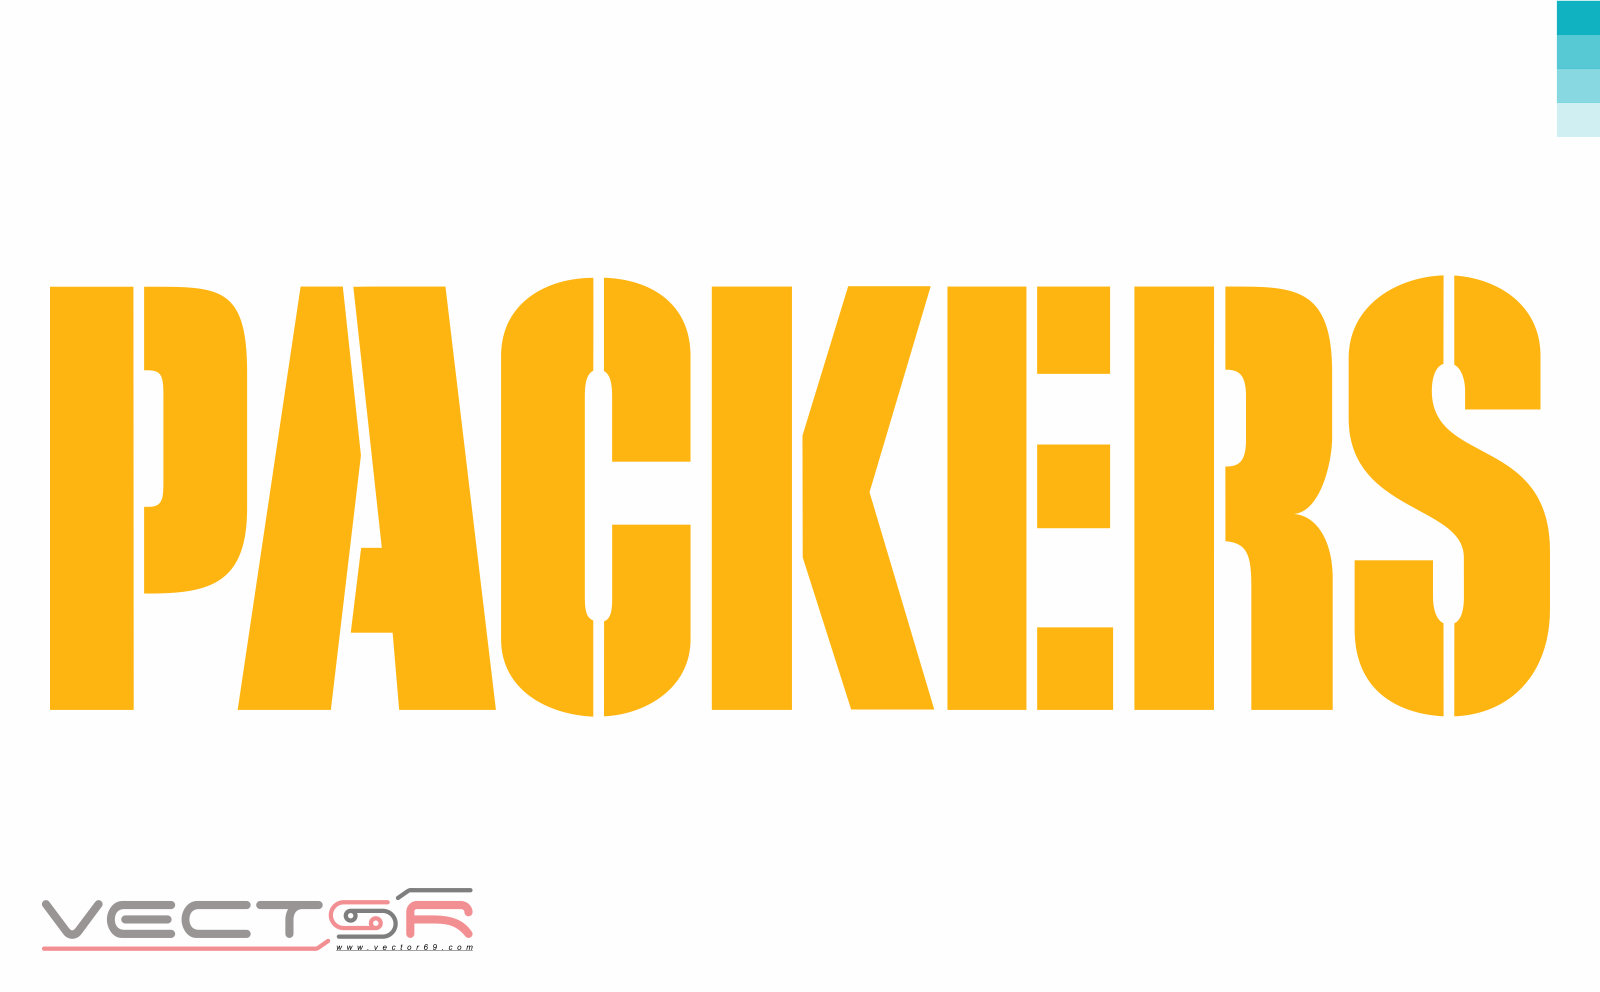 Green Bay Packers Gold Wordmark (1959) - Download Vector File SVG (Scalable Vector Graphics)